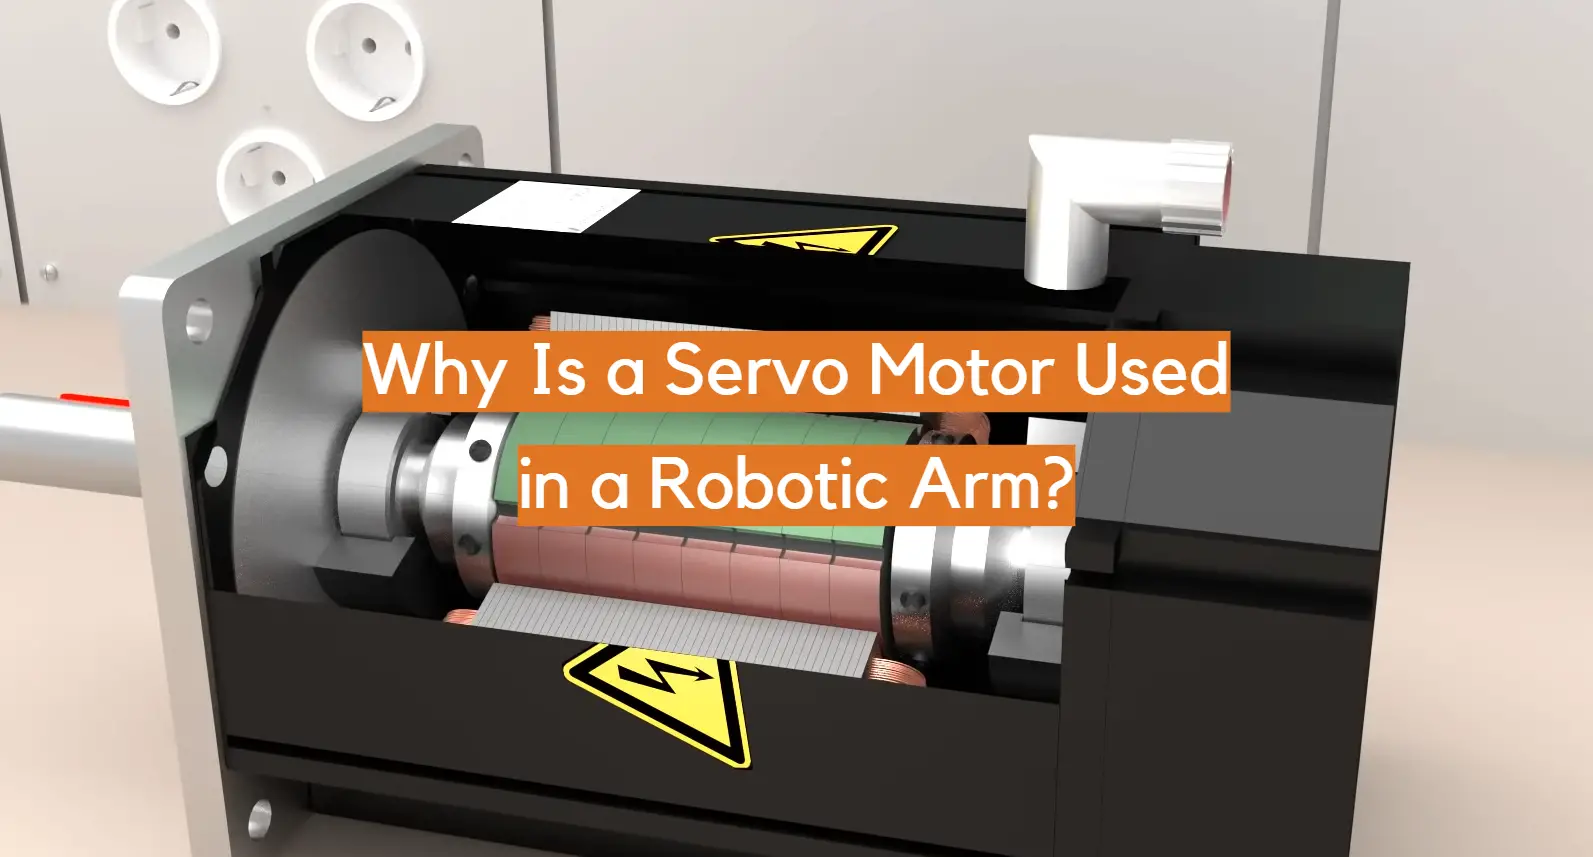 Why Is a Servo Motor Used in a Robotic Arm?